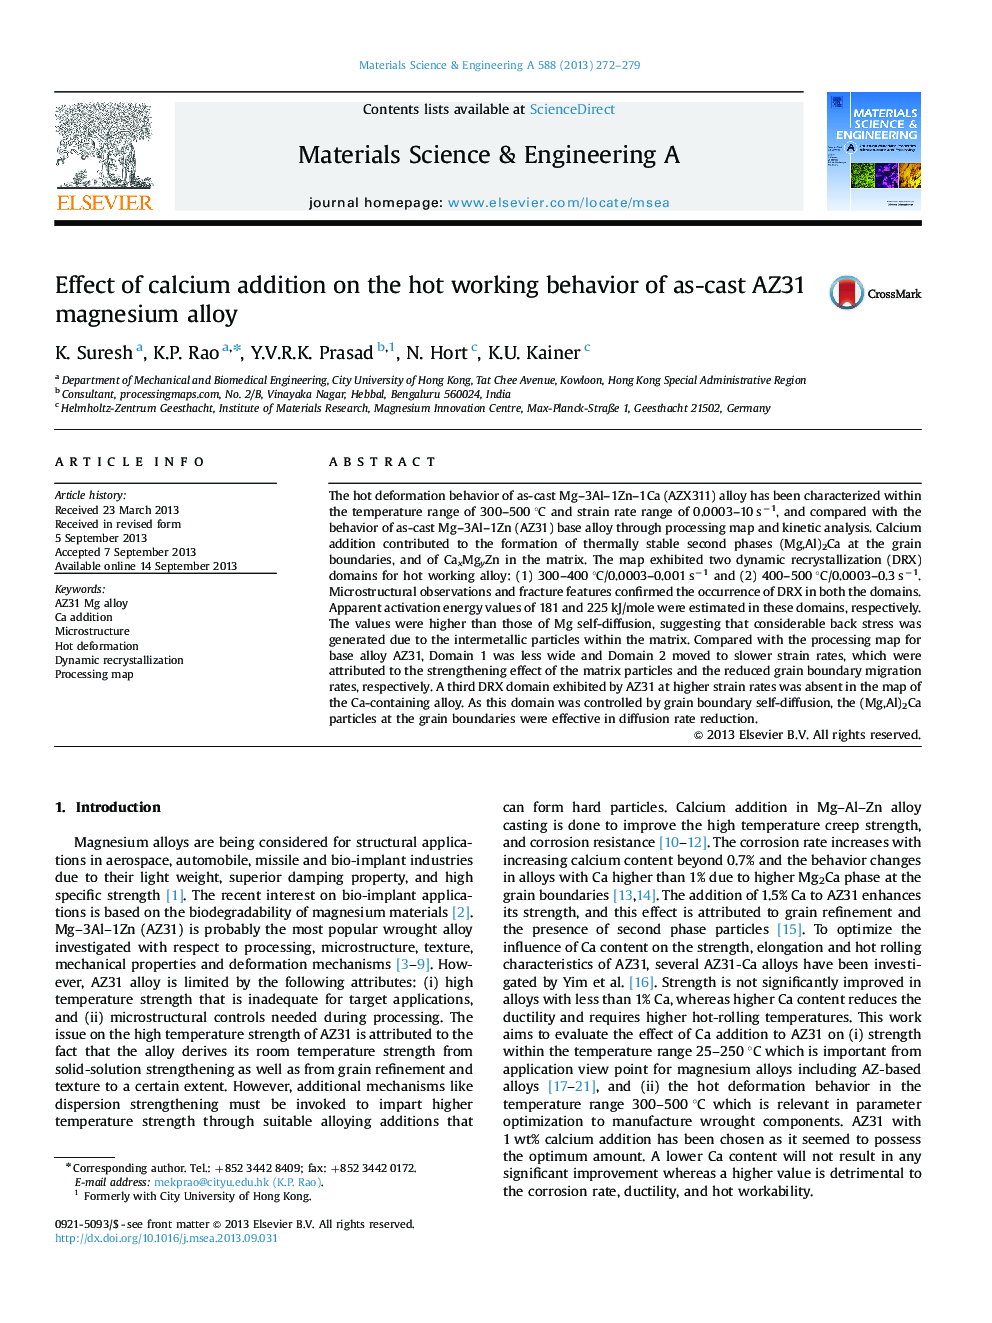 Effect of calcium addition on the hot working behavior of as-cast AZ31 magnesium alloy